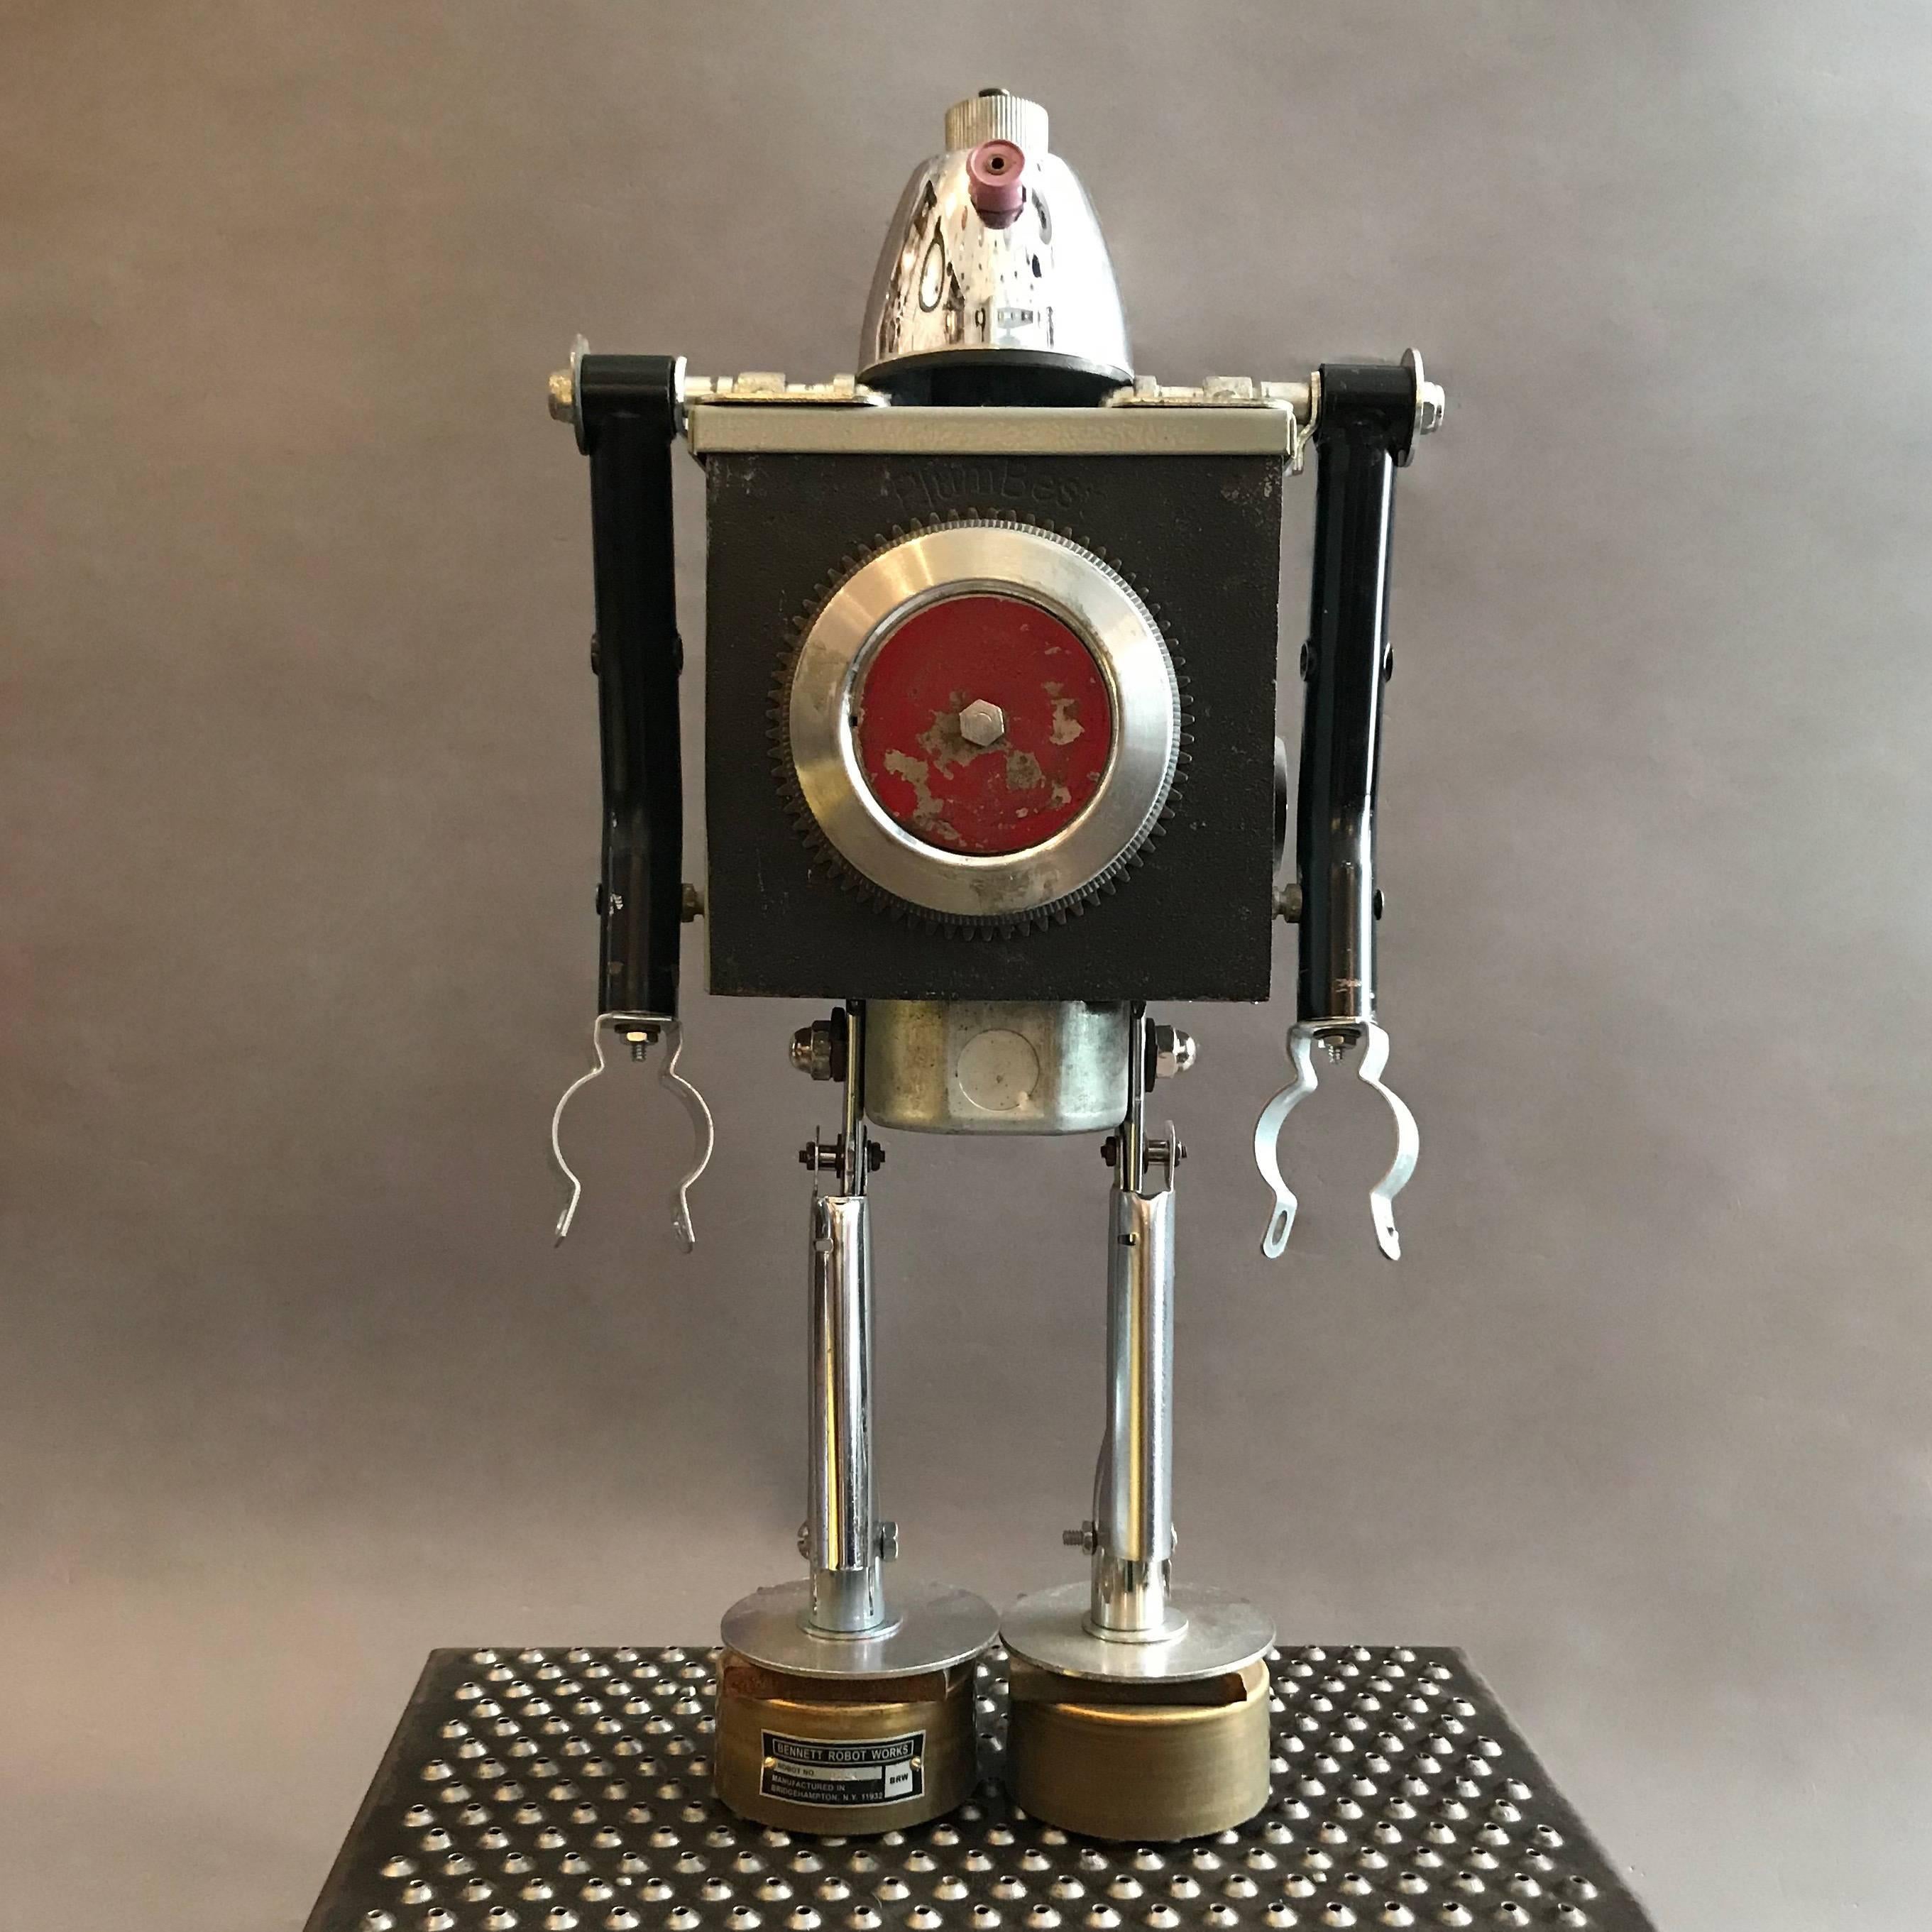 Custom robot sculpture named Plumbest by Bennett Robot Works, Brooklyn, NY

Bennett Robot Works, robot sculptures created by Gordon Bennett, are composed of found objects used in their unaltered entirety. They are inspired by Norman Bel Geddes and